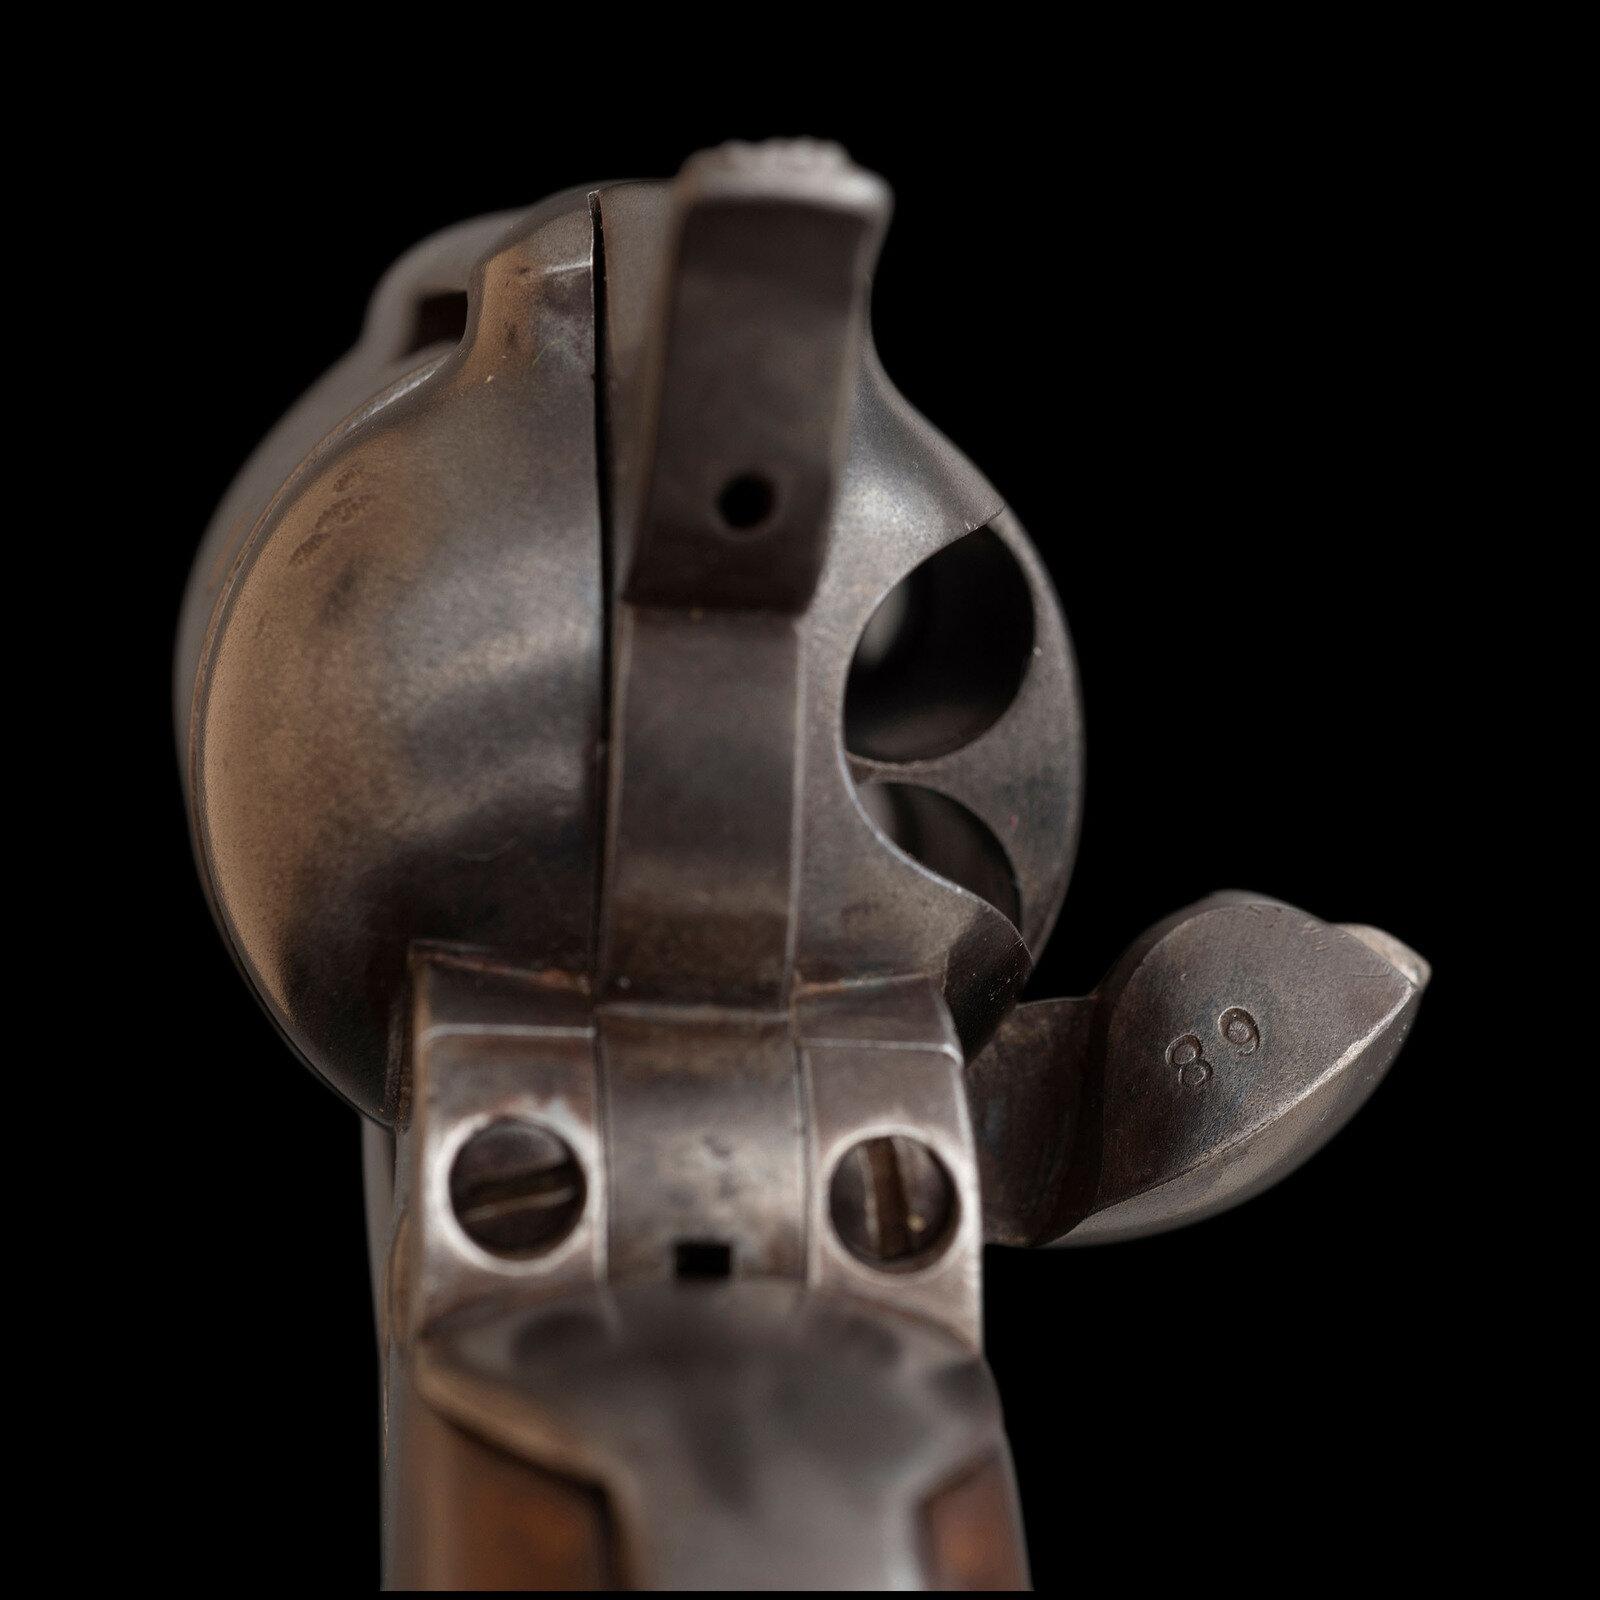 Custer Range Colt SAA Cav Revolver #5973 - A Lot 6 Delivery - Likely Picked Up at The Little Bighorn